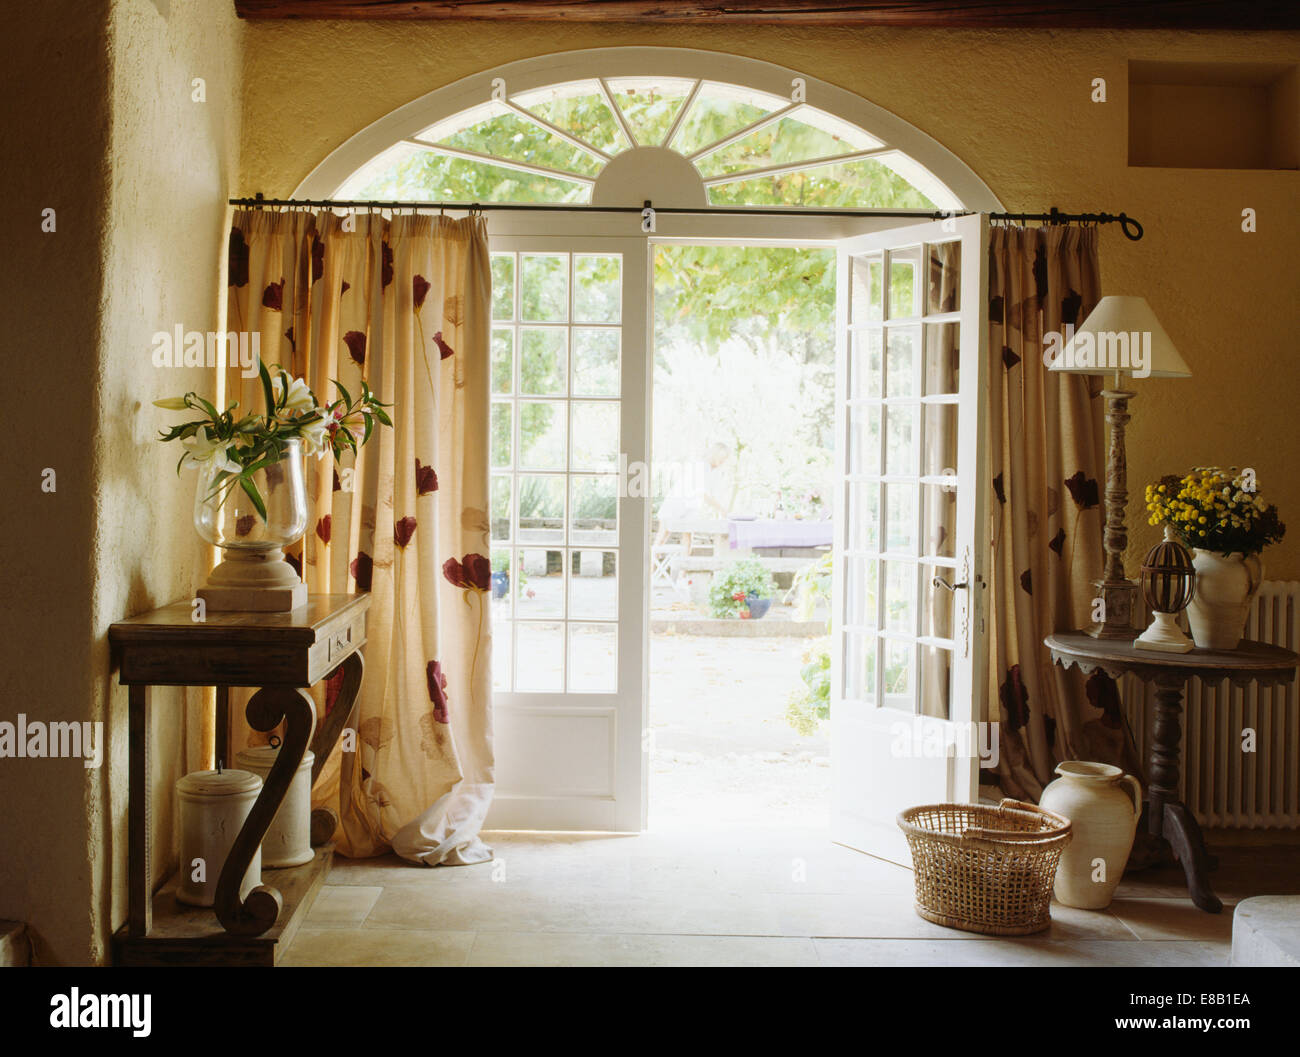 French Country Hall With Patterned Cream Curtain On Half